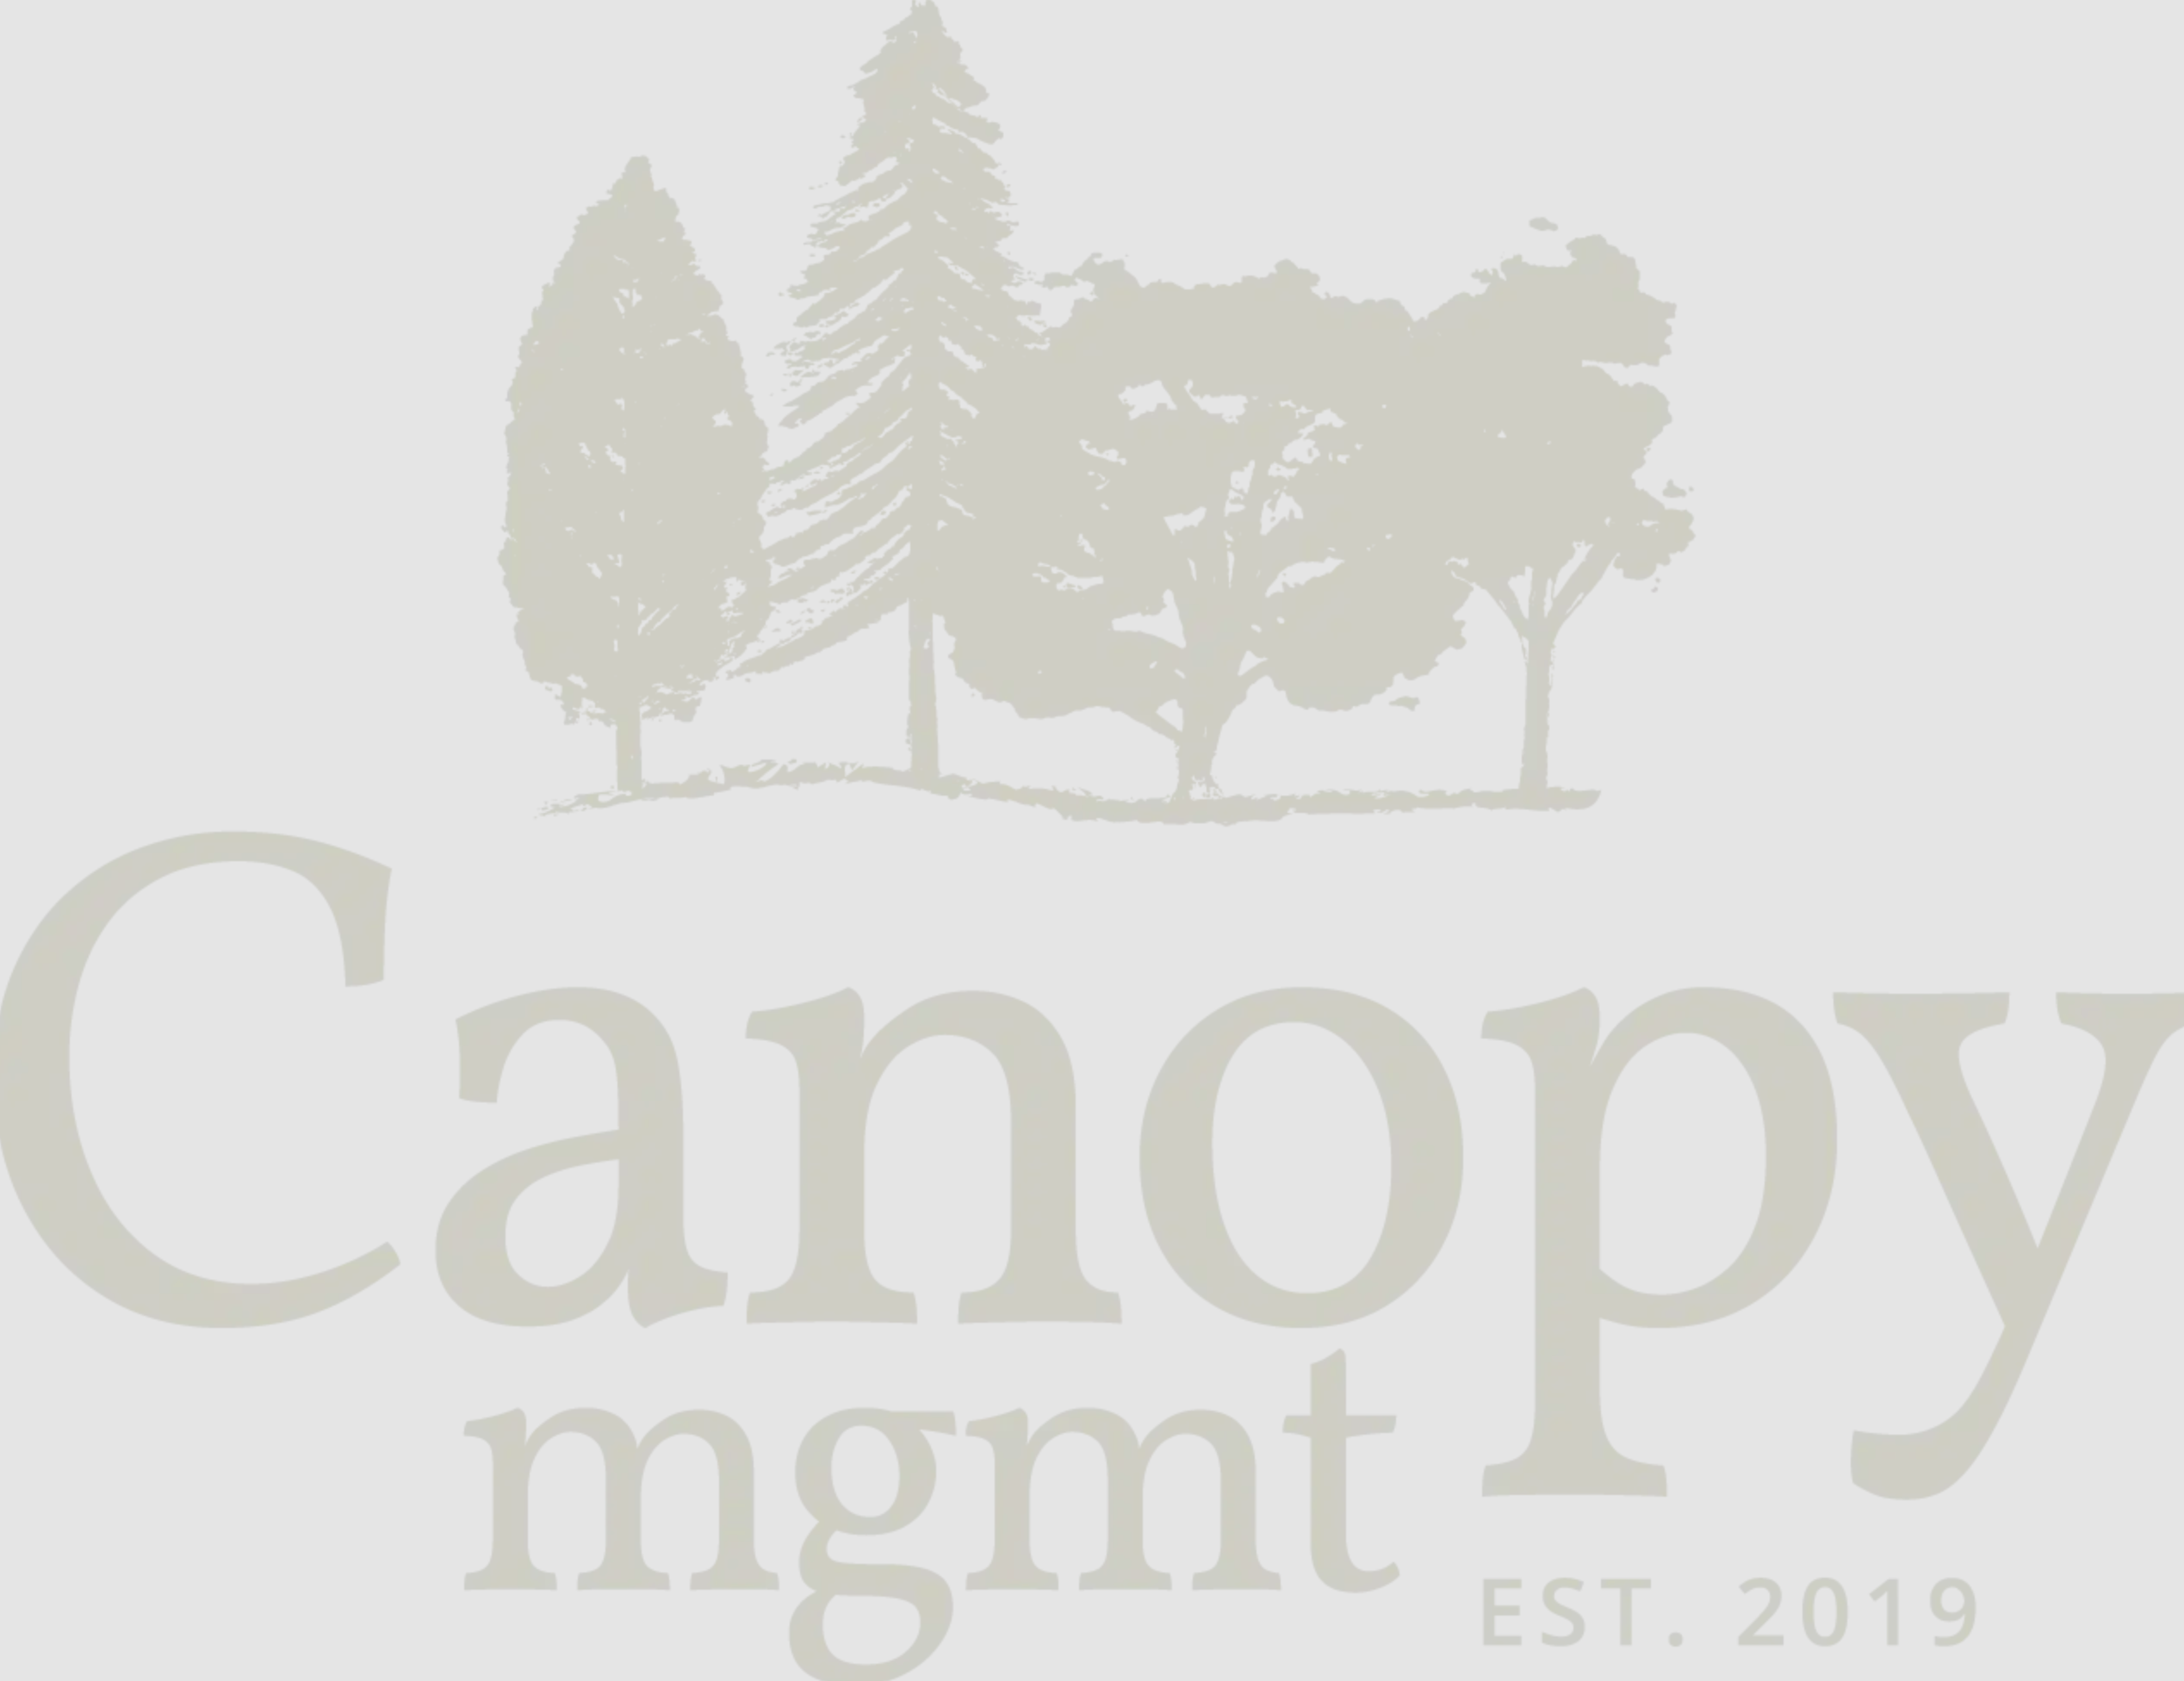 Canopy Mgmt